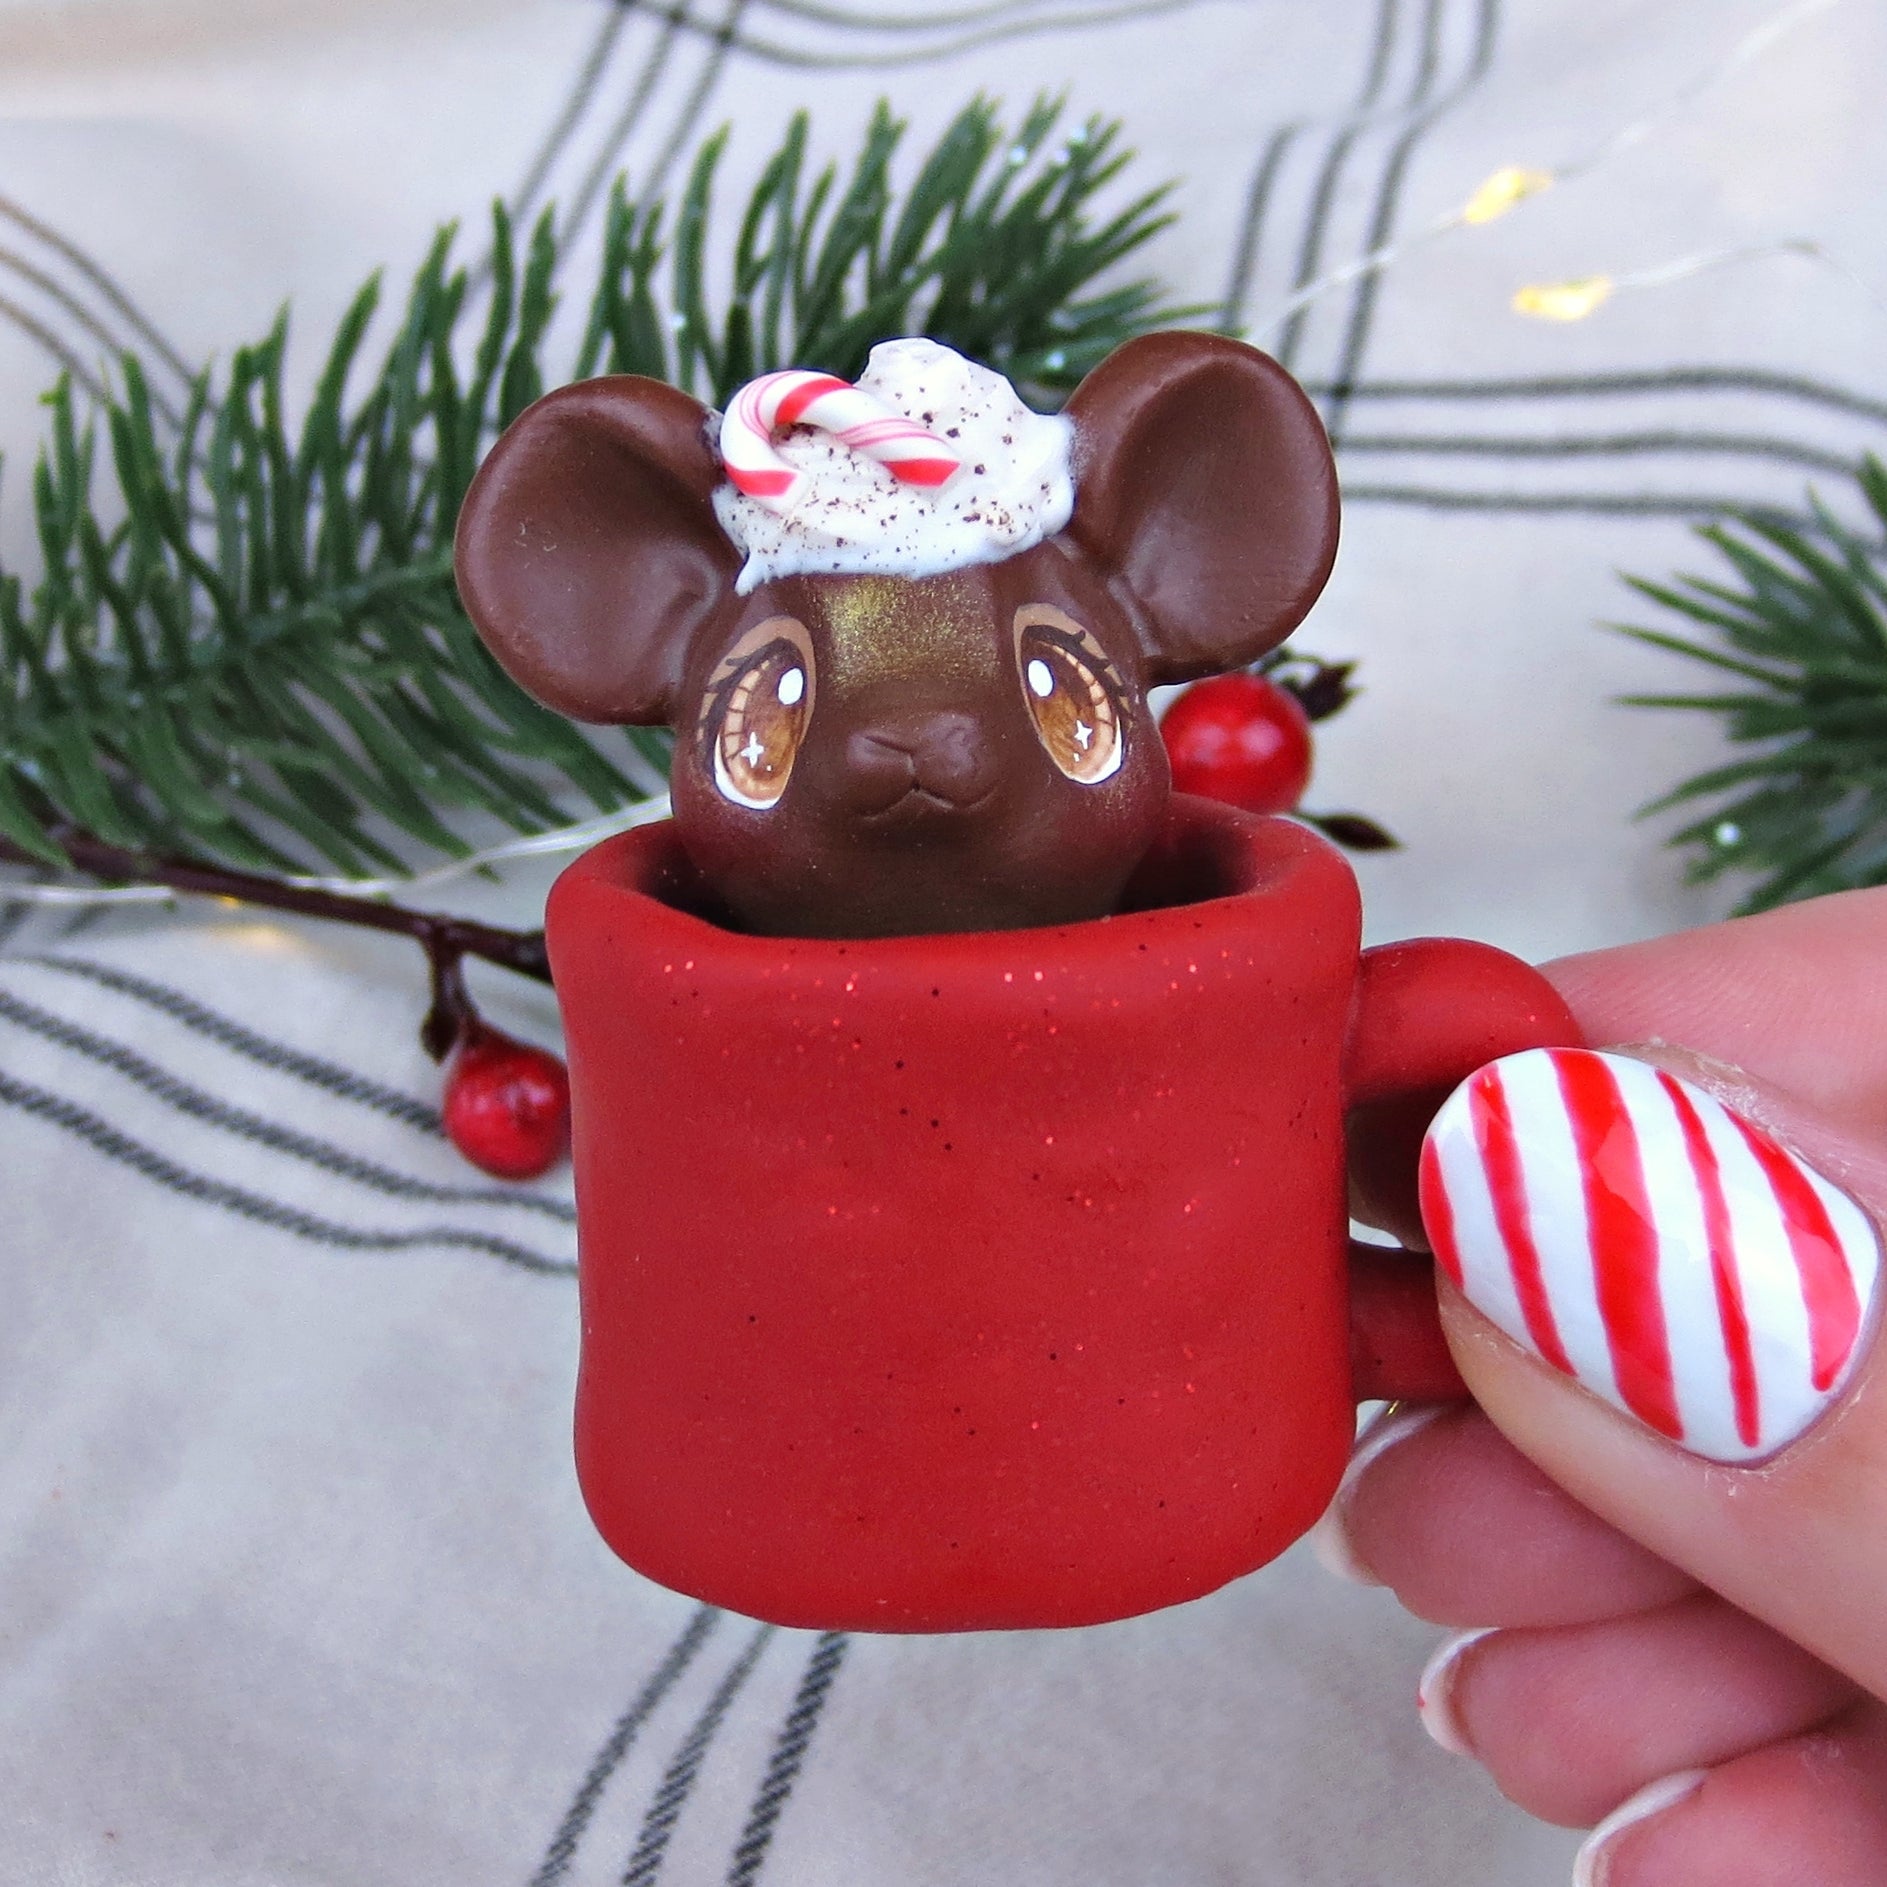 Peppermint Mocha Mouse in a Mug Figurine - Polymer Clay Christmas Collection